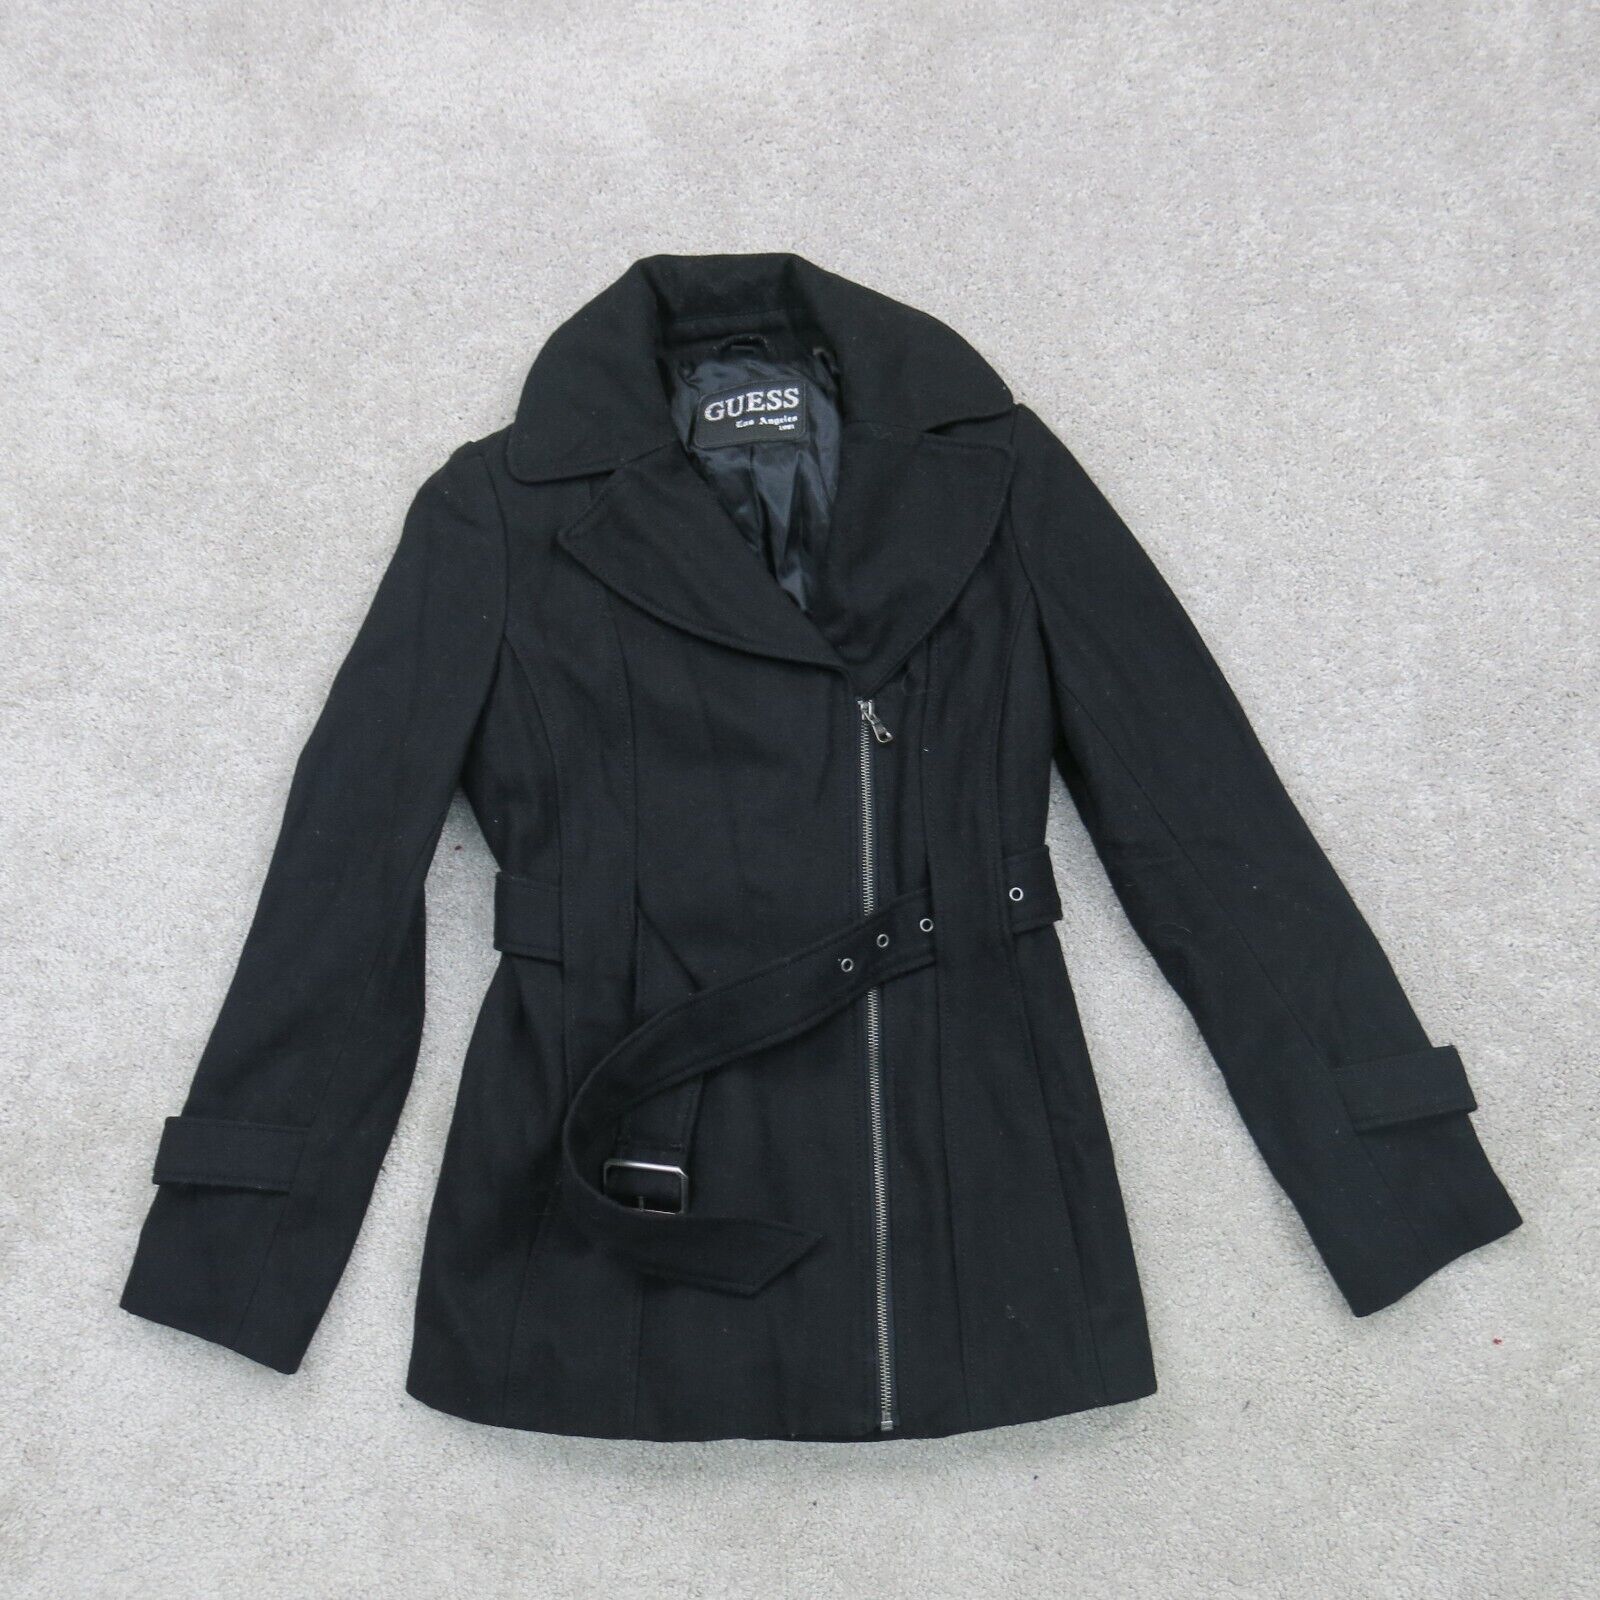 Guess Pleated Wool Blend Flared Coat on SALE